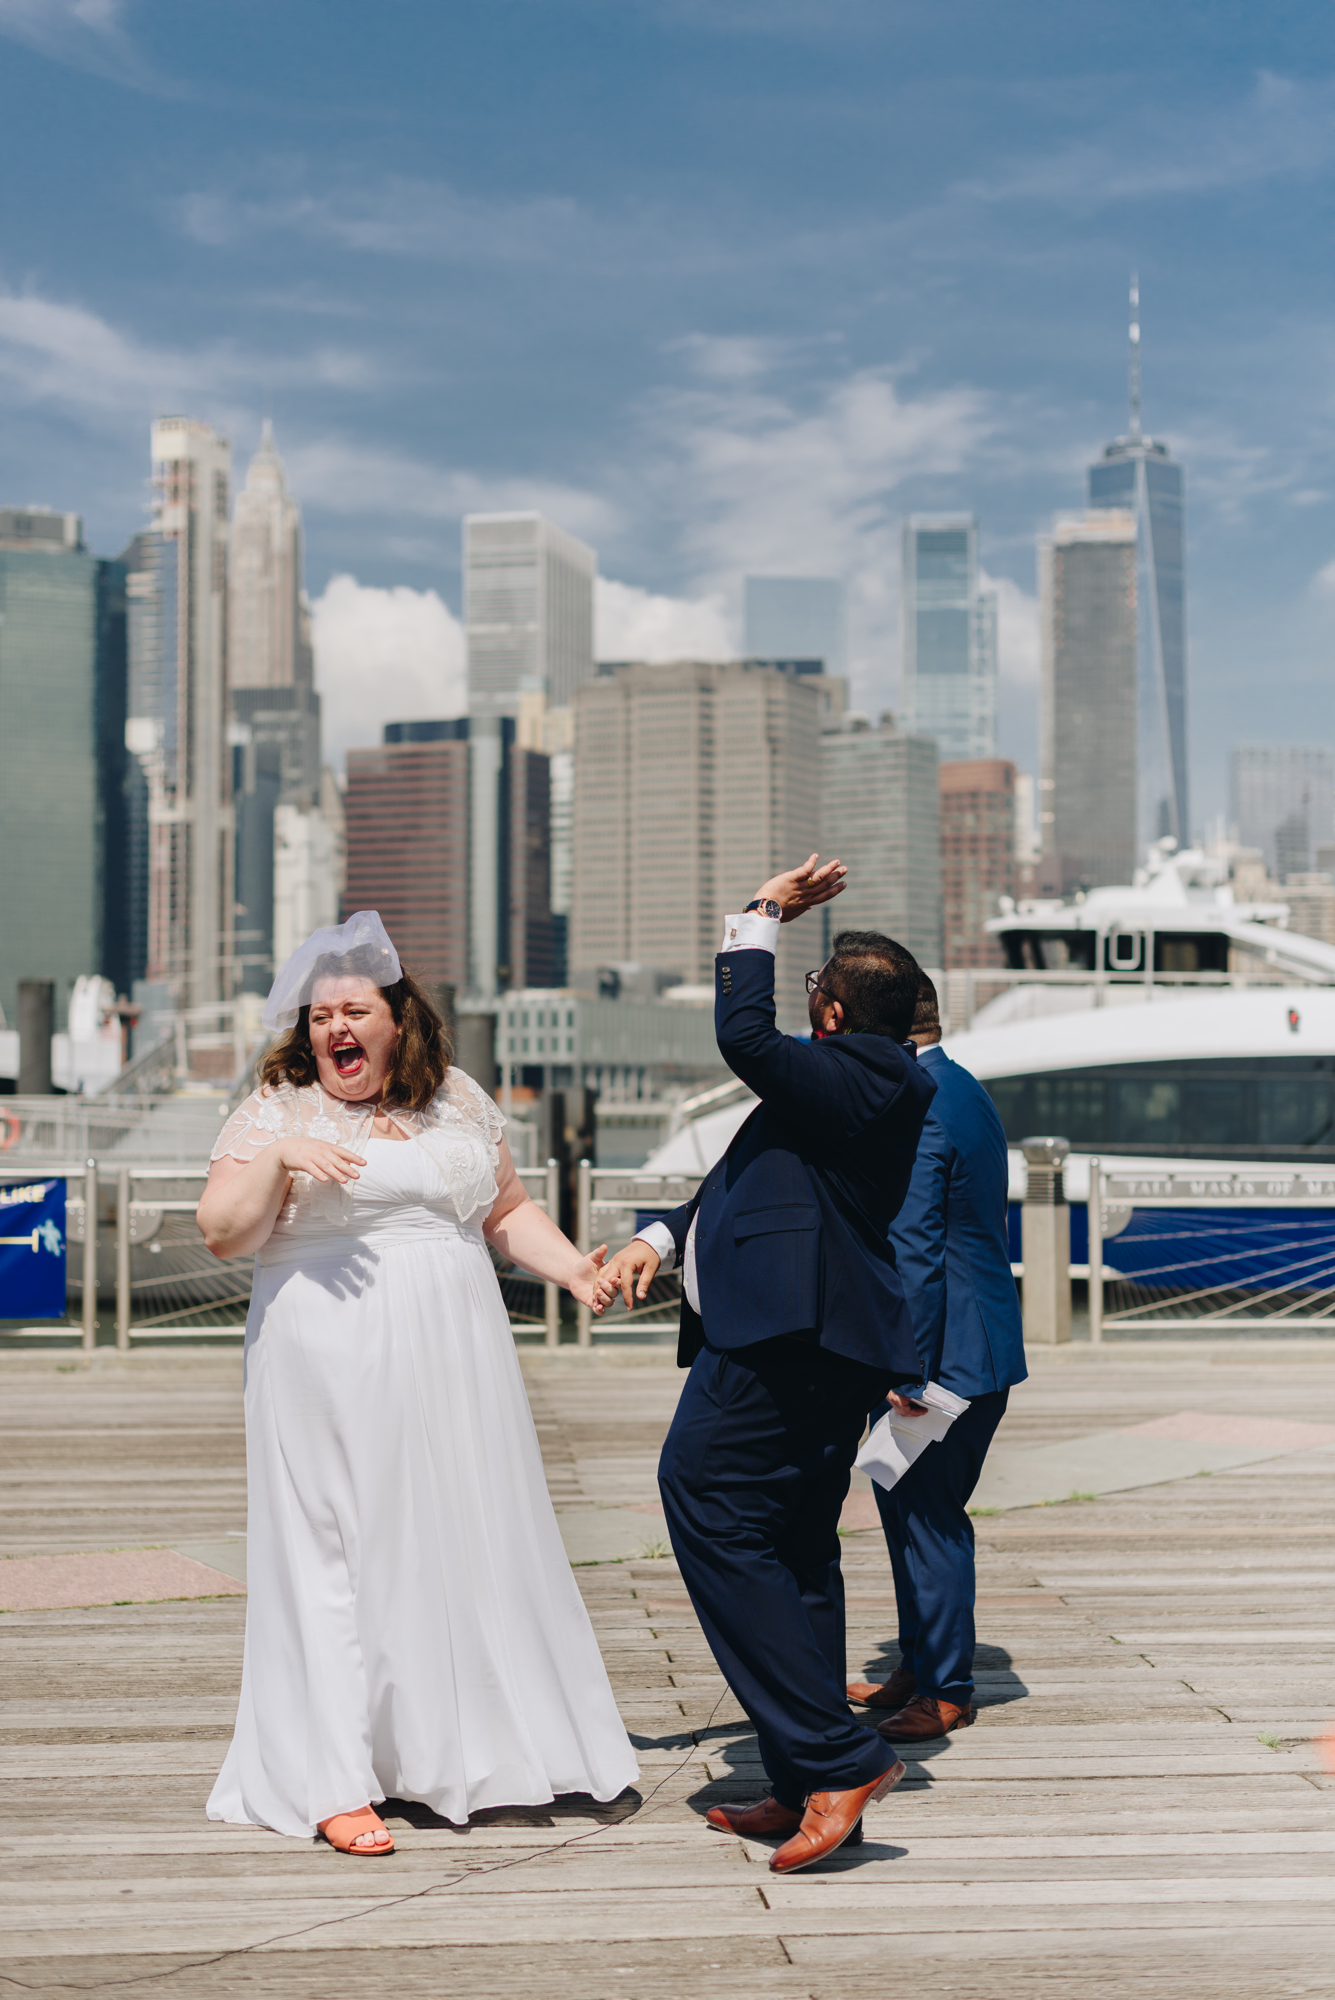 Dumbo candid elopement photography